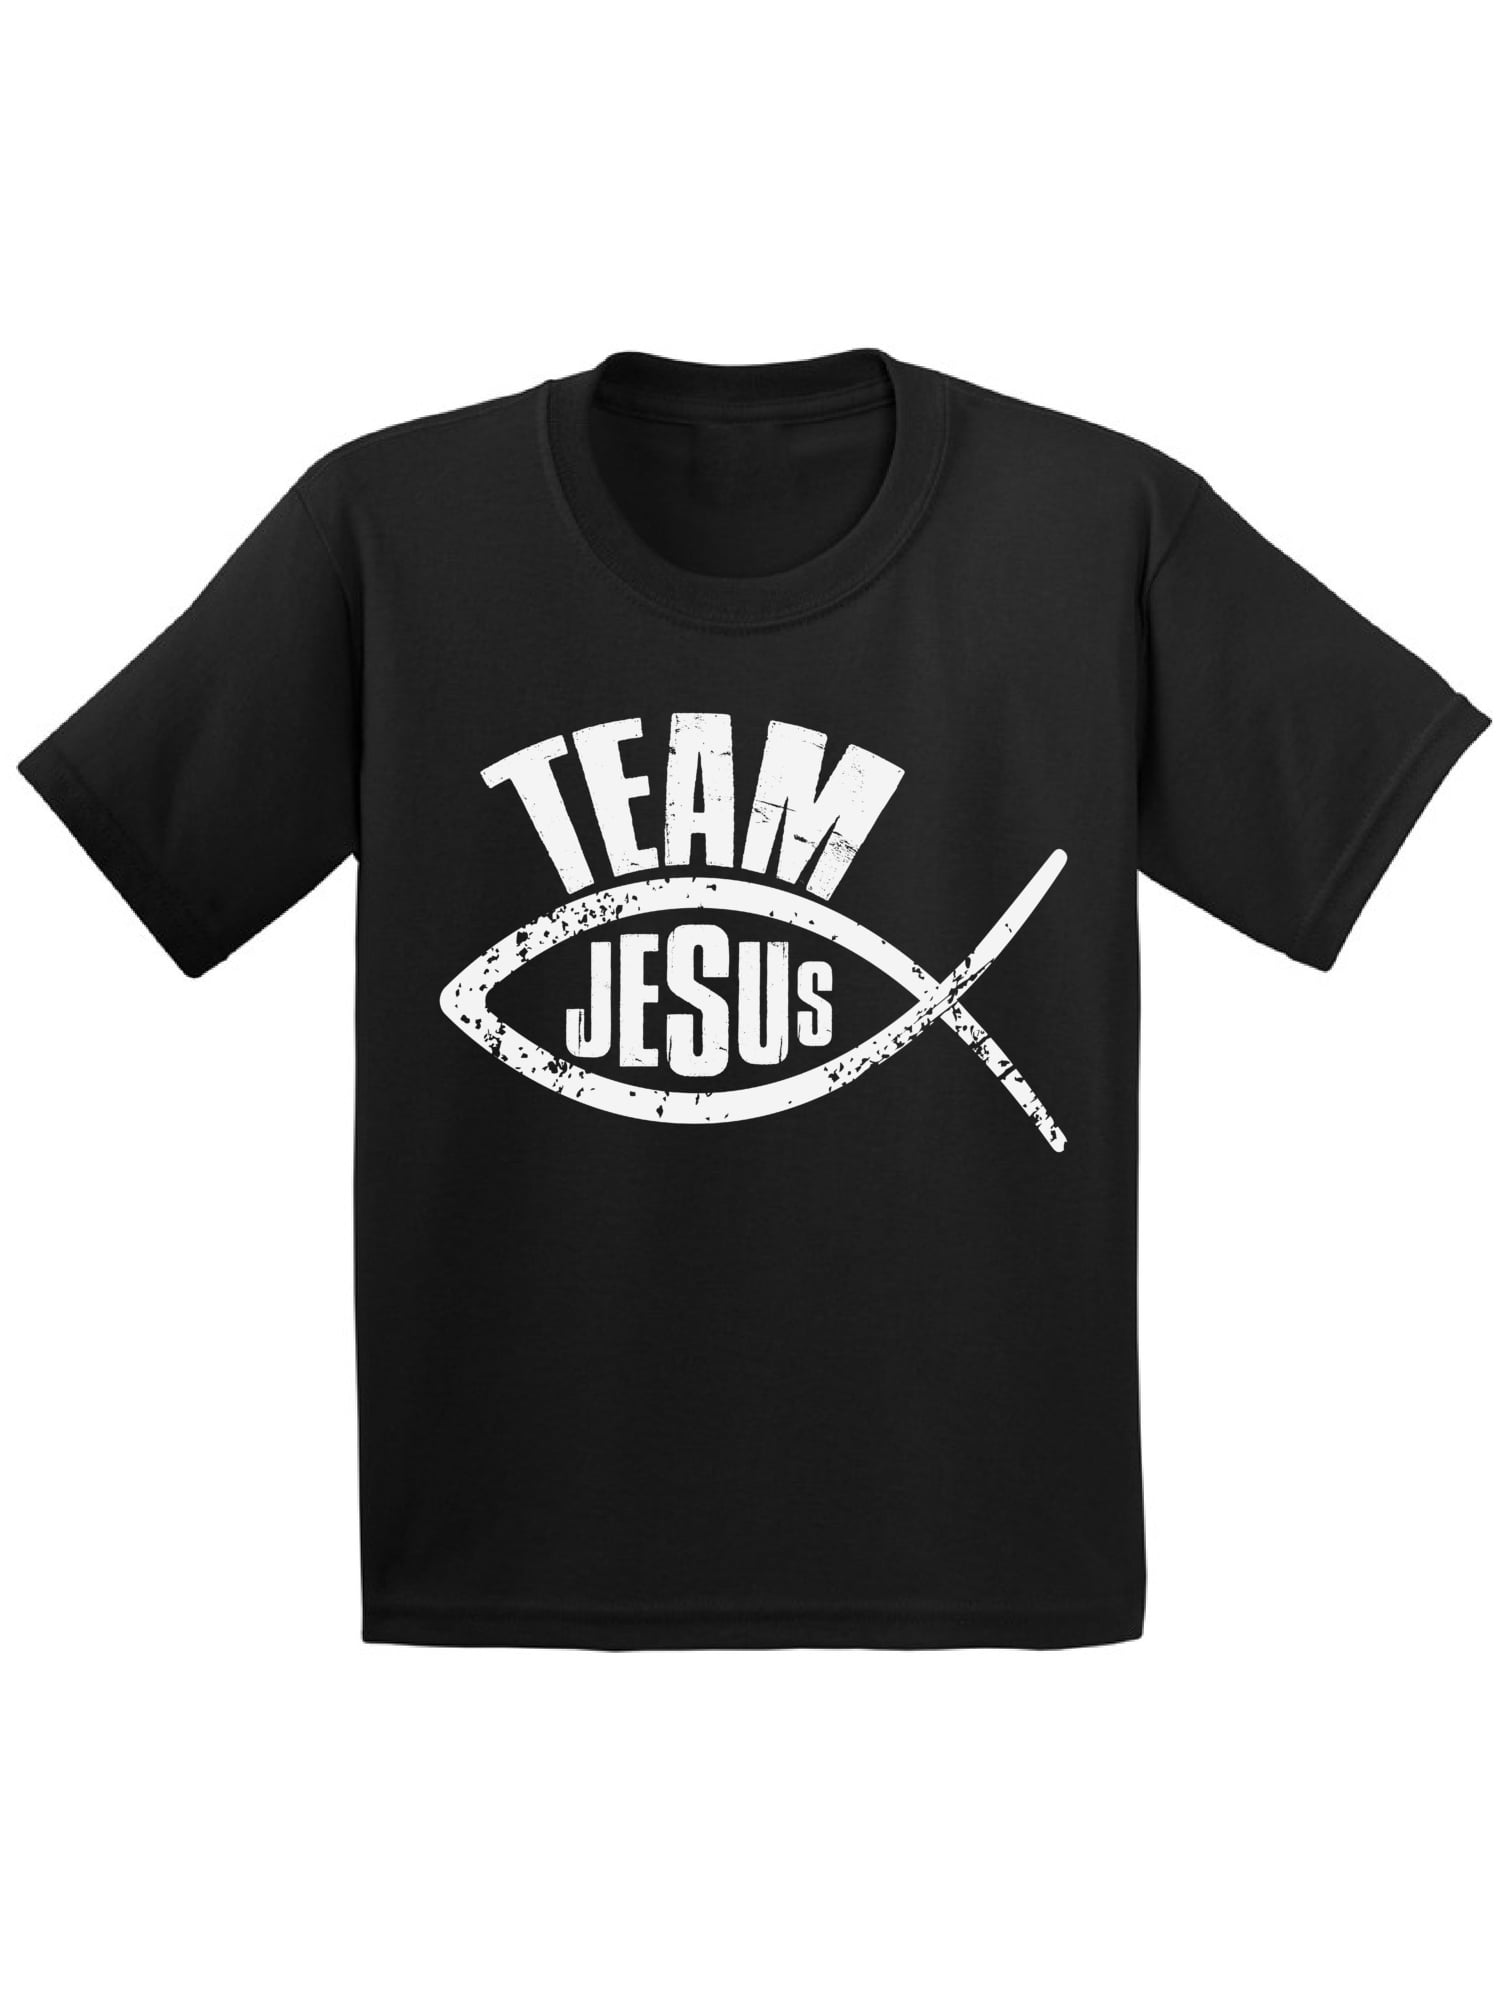 Awkward Styles - Awkward Styles Team Jesus Youth T Shirt Fish Shirt for Kids Christian T Shirt for Boys Christian Shirts for Girls Jesus T-Shirt for Children Christian Gifts for Little One Jesus Clothing for Children